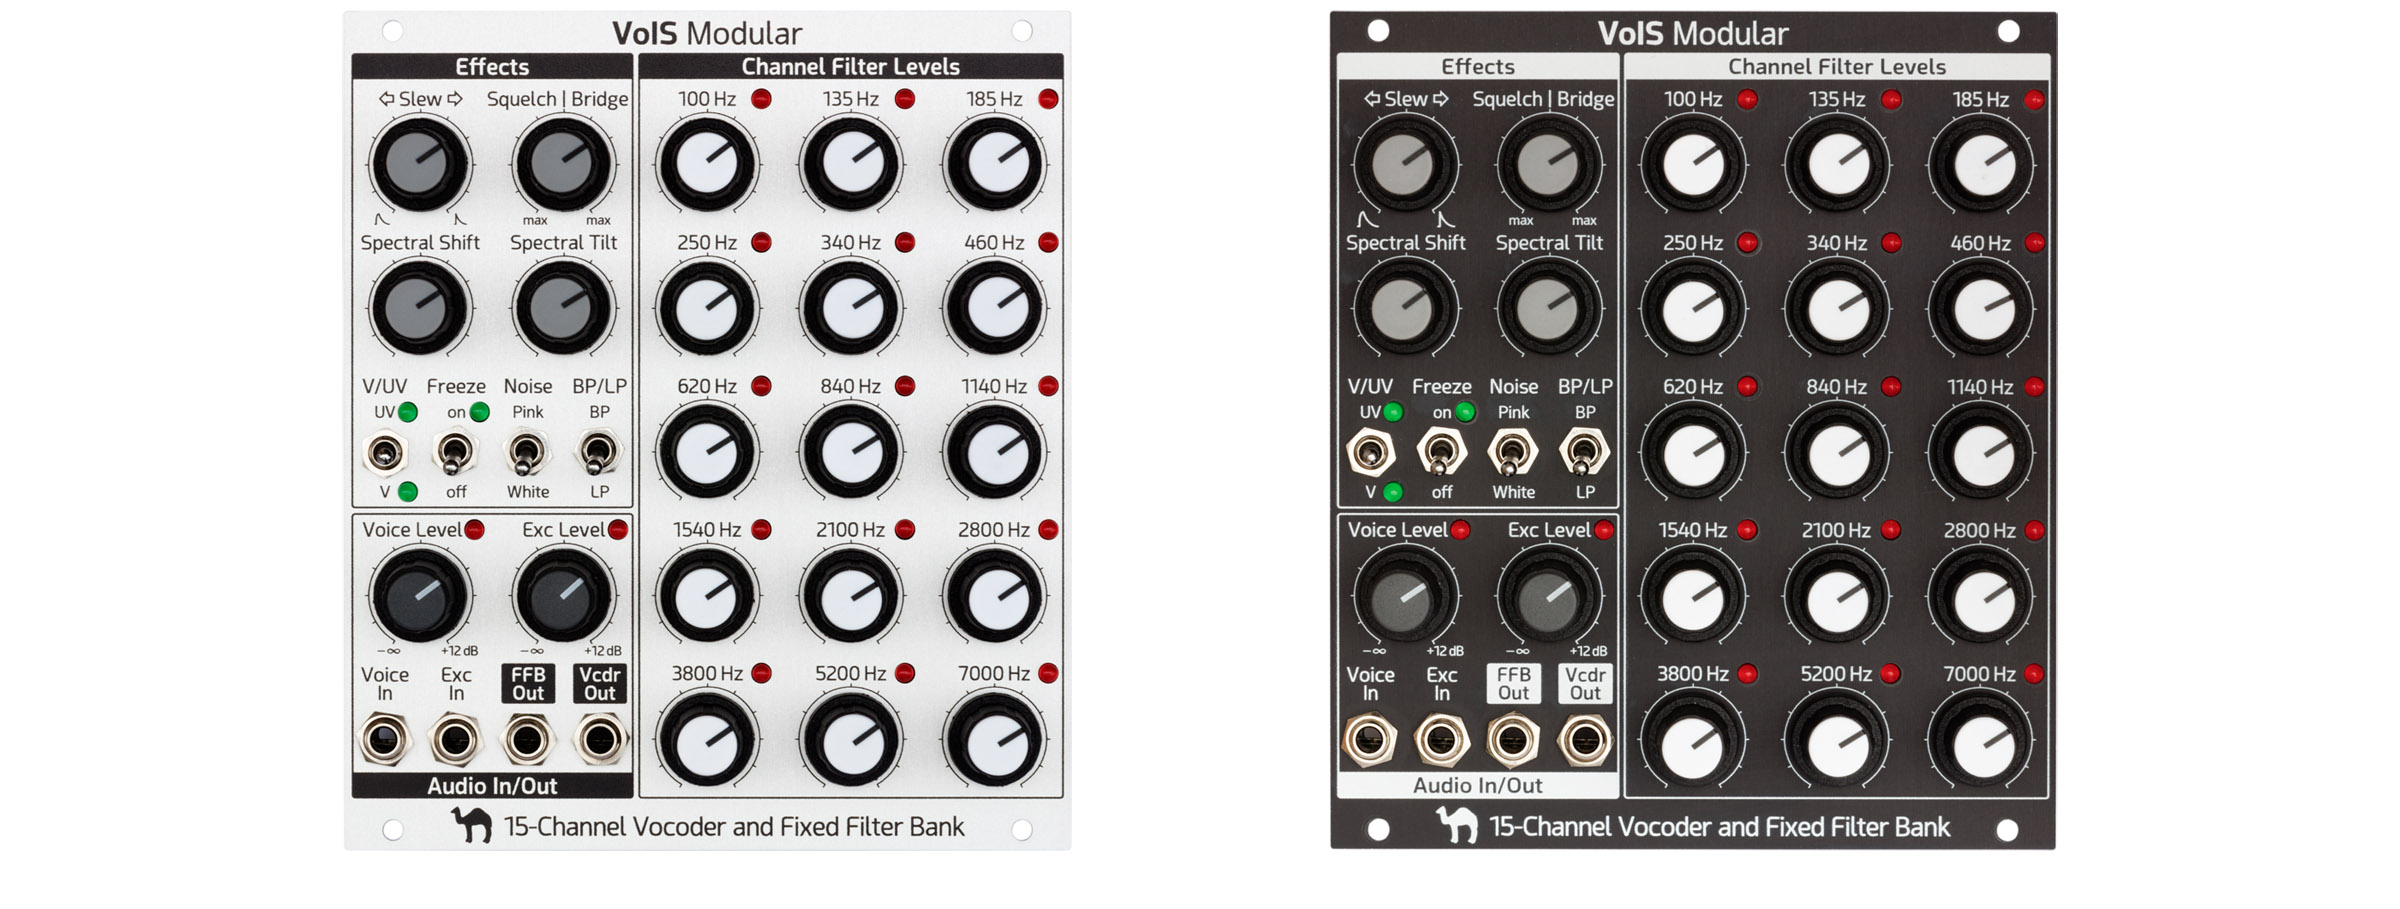 VoIS modular front sides in white and black